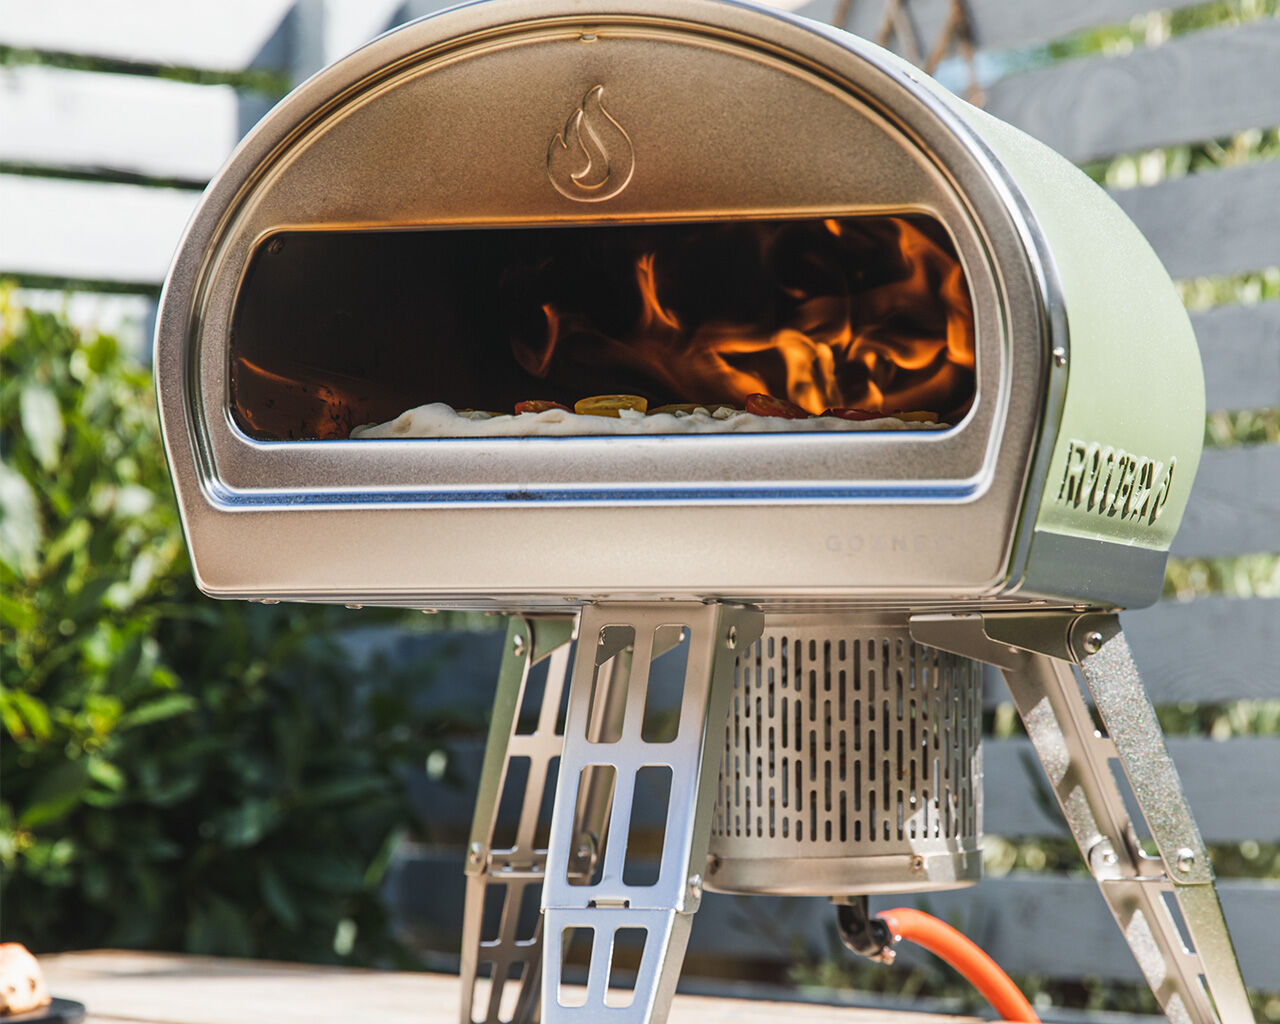 Buy Gozney Roccbox Portable Pizza Oven - Olive at Barbeques Galore.